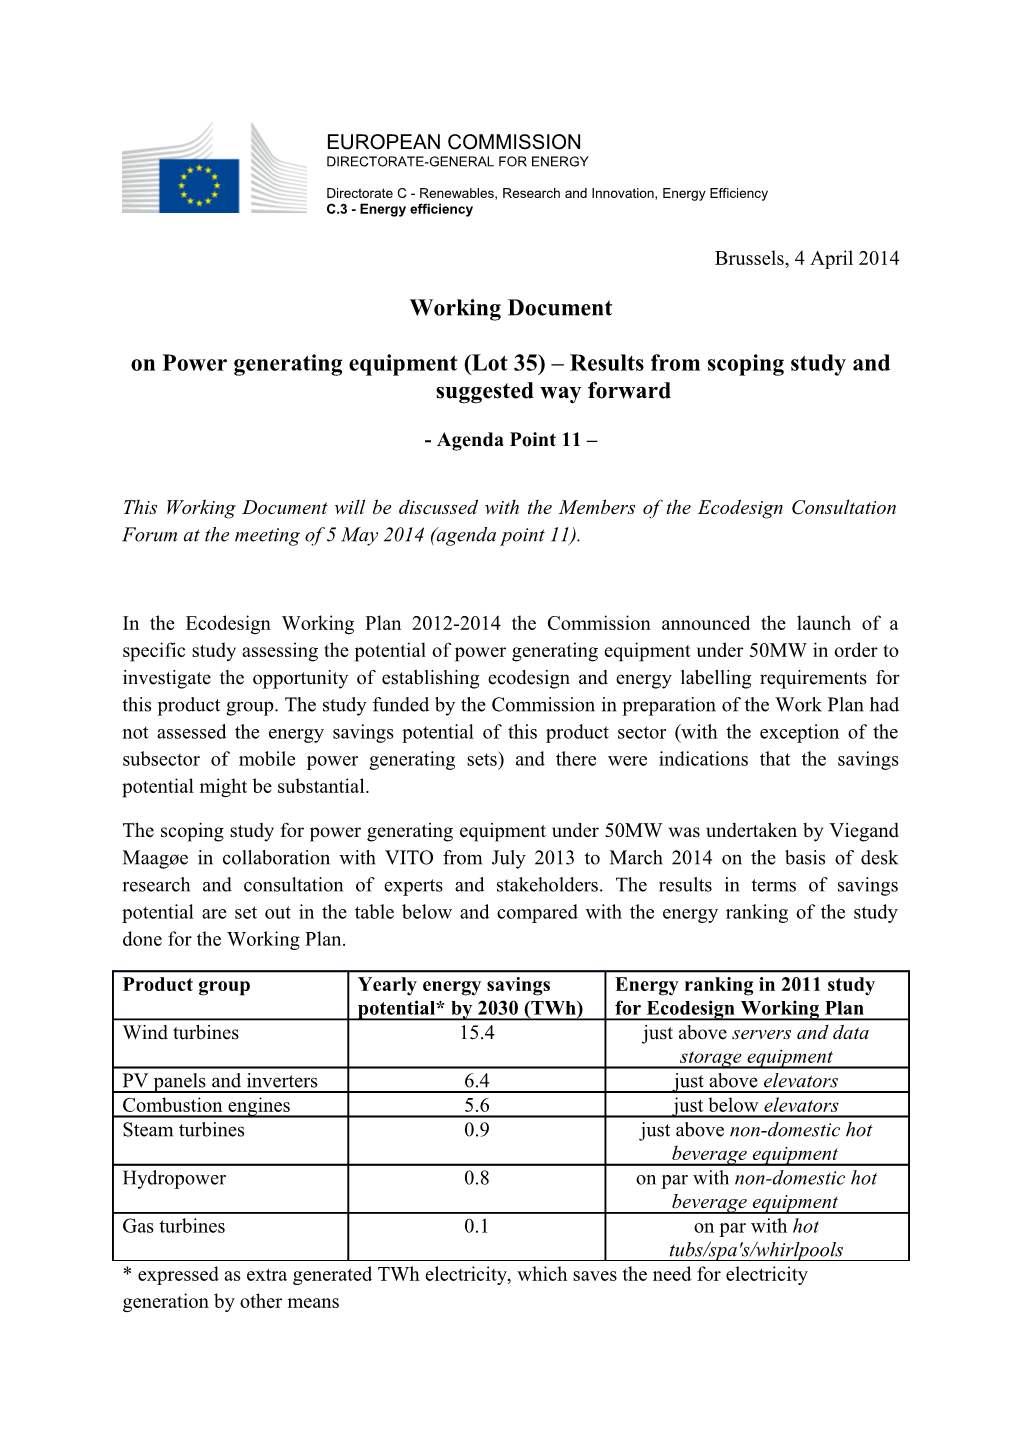 Onpower Generating Equipment (Lot 35) Results from Scoping Study and Suggested Way Forward